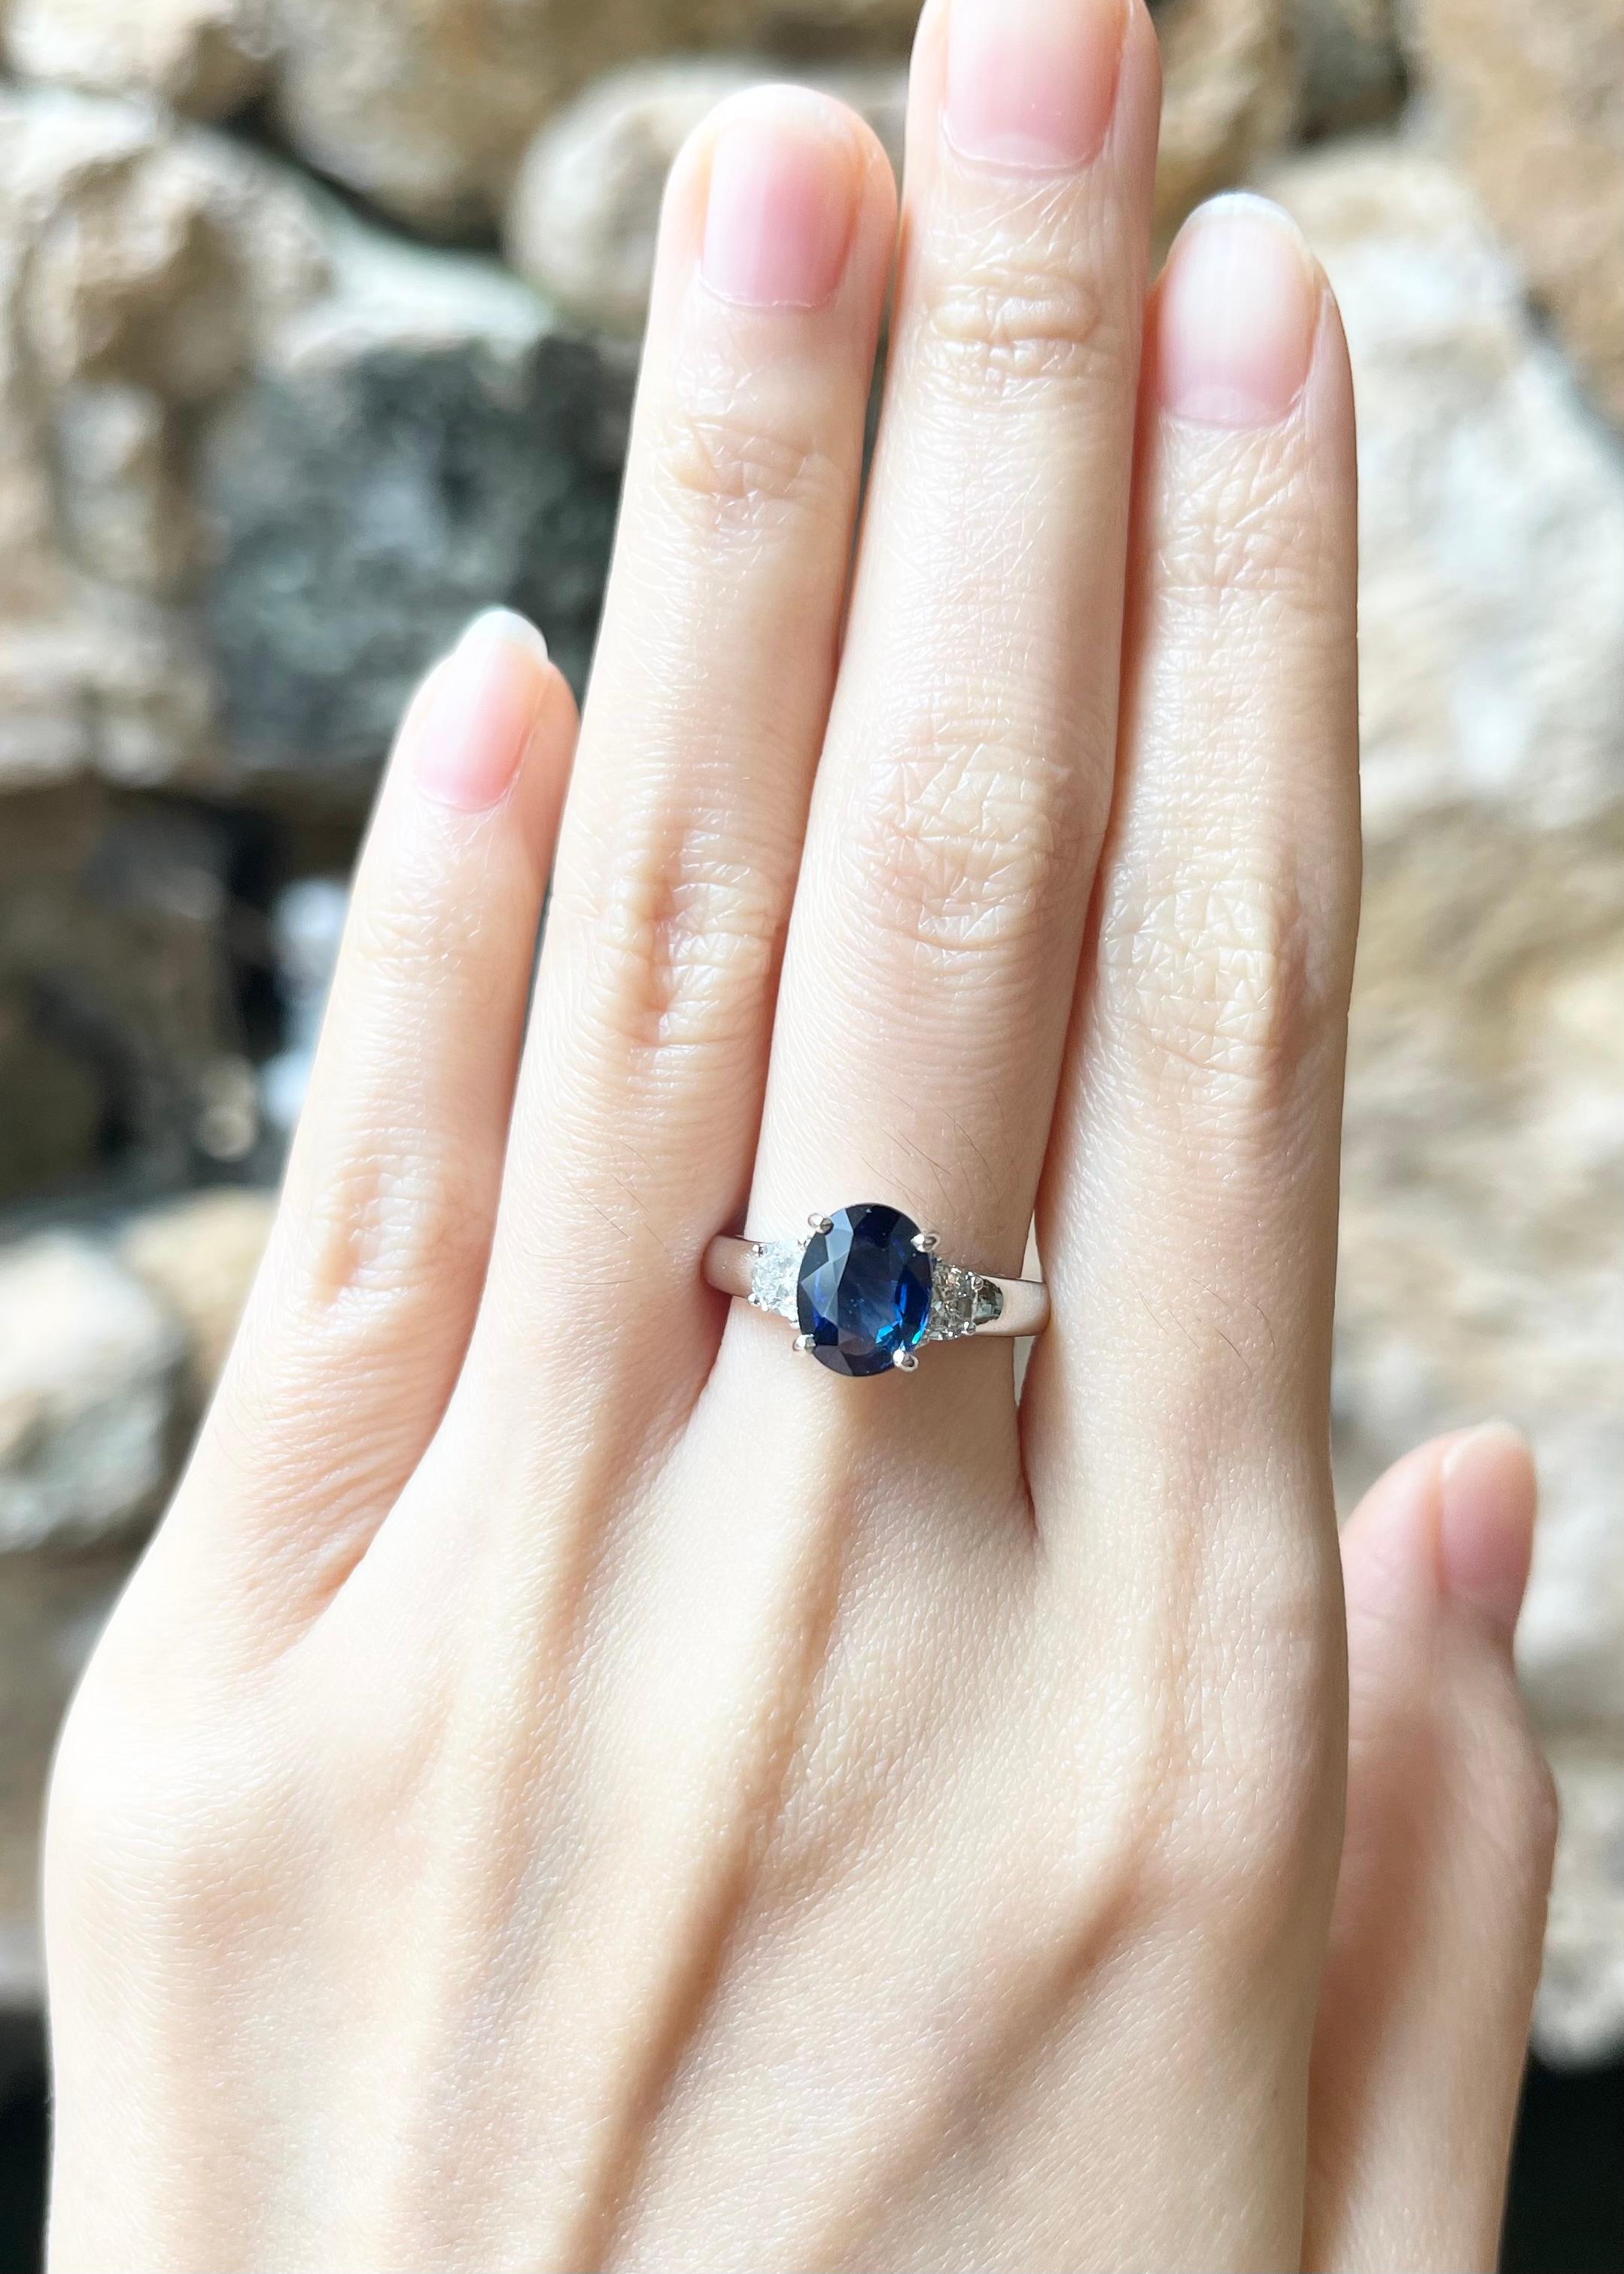 Blue Sapphire 2.08 carats with Diamond 0.36 carat Ring set in Platinum 950 Settings
(GIA Certified)

Width:  1.3 cm 
Length: 0.8 cm
Ring Size: 53
Total Weight: 6.68 grams

Blue Sapphire 
Width:  0.7 cm 
Length: 0.8 cm

